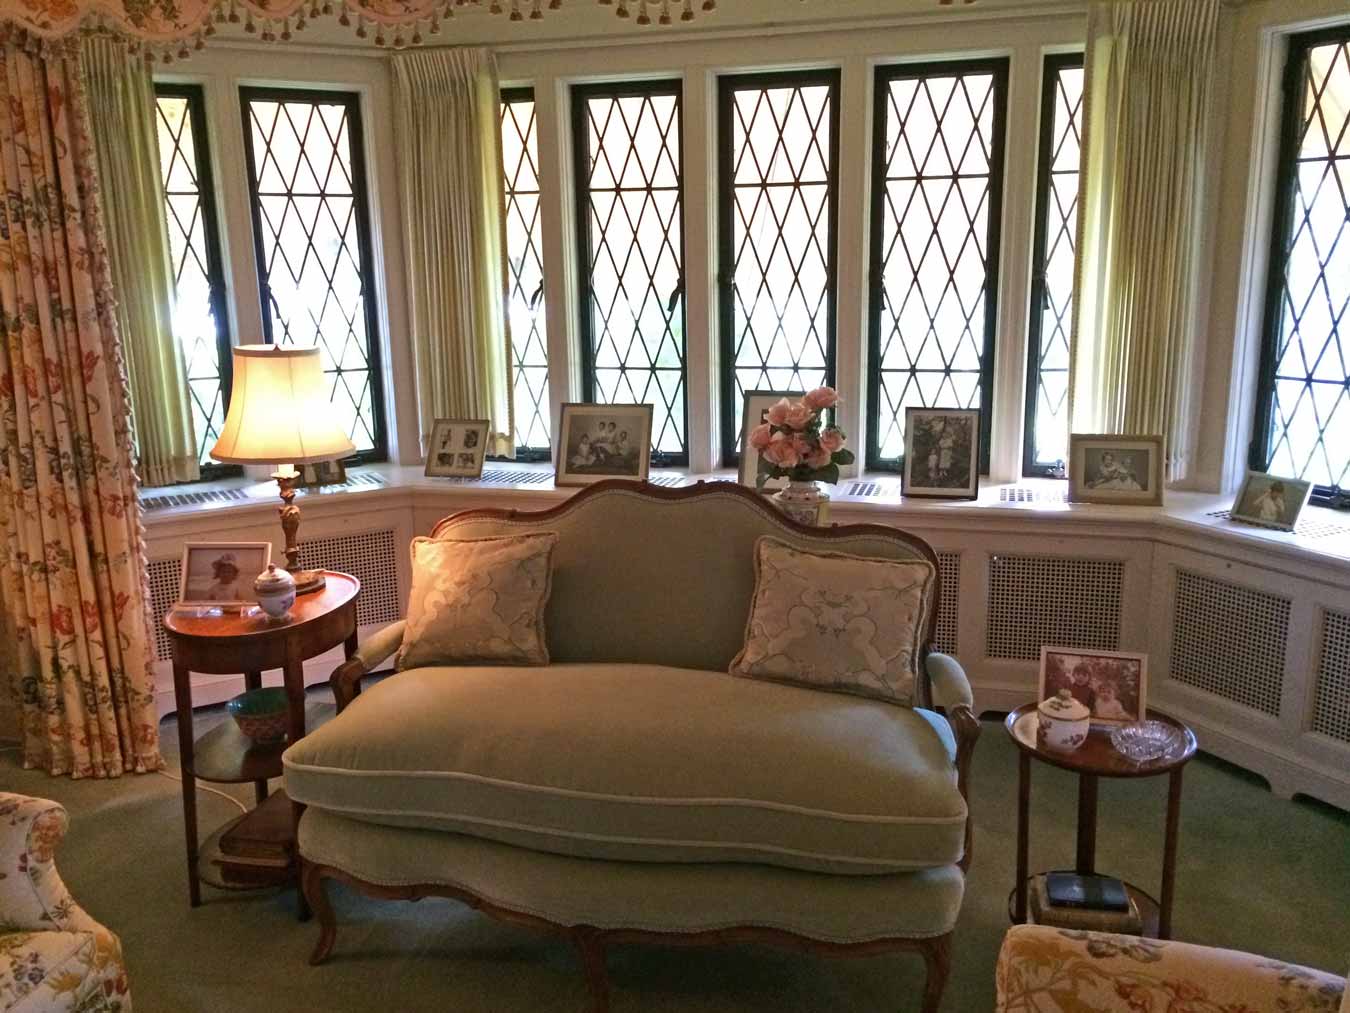 Wading In Big Shoes: Inside The Edsel And Eleanor Ford House // Take a peek inside the Edsel and Eleanor Ford House, Grounds, and Gardens in Grosse Pointe Shores, Michigan! Learn what you'll see during the tour here.